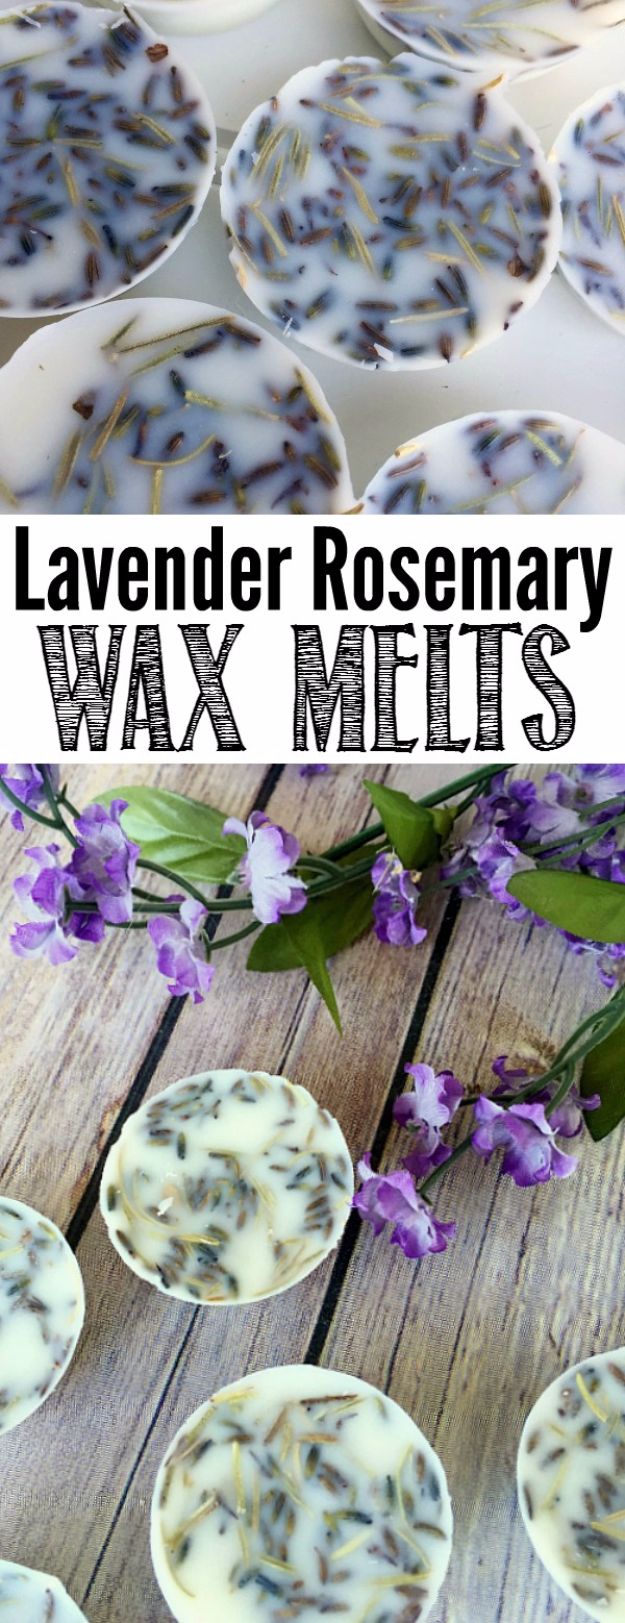 DIY Ideas for Candles - Lavender Rosemary Wax Melts - Cute, Cheap and Creative Ways to Decorate With Candles - Votives and Candle Holders Make Some Of Our Favorite Home Decor Ideas and Homemade Do It Yourself Gifts - Give One of These Inexpensive Ideas to Mom, Dad and Friends - Easy Dollar Store Crafts With Candle 